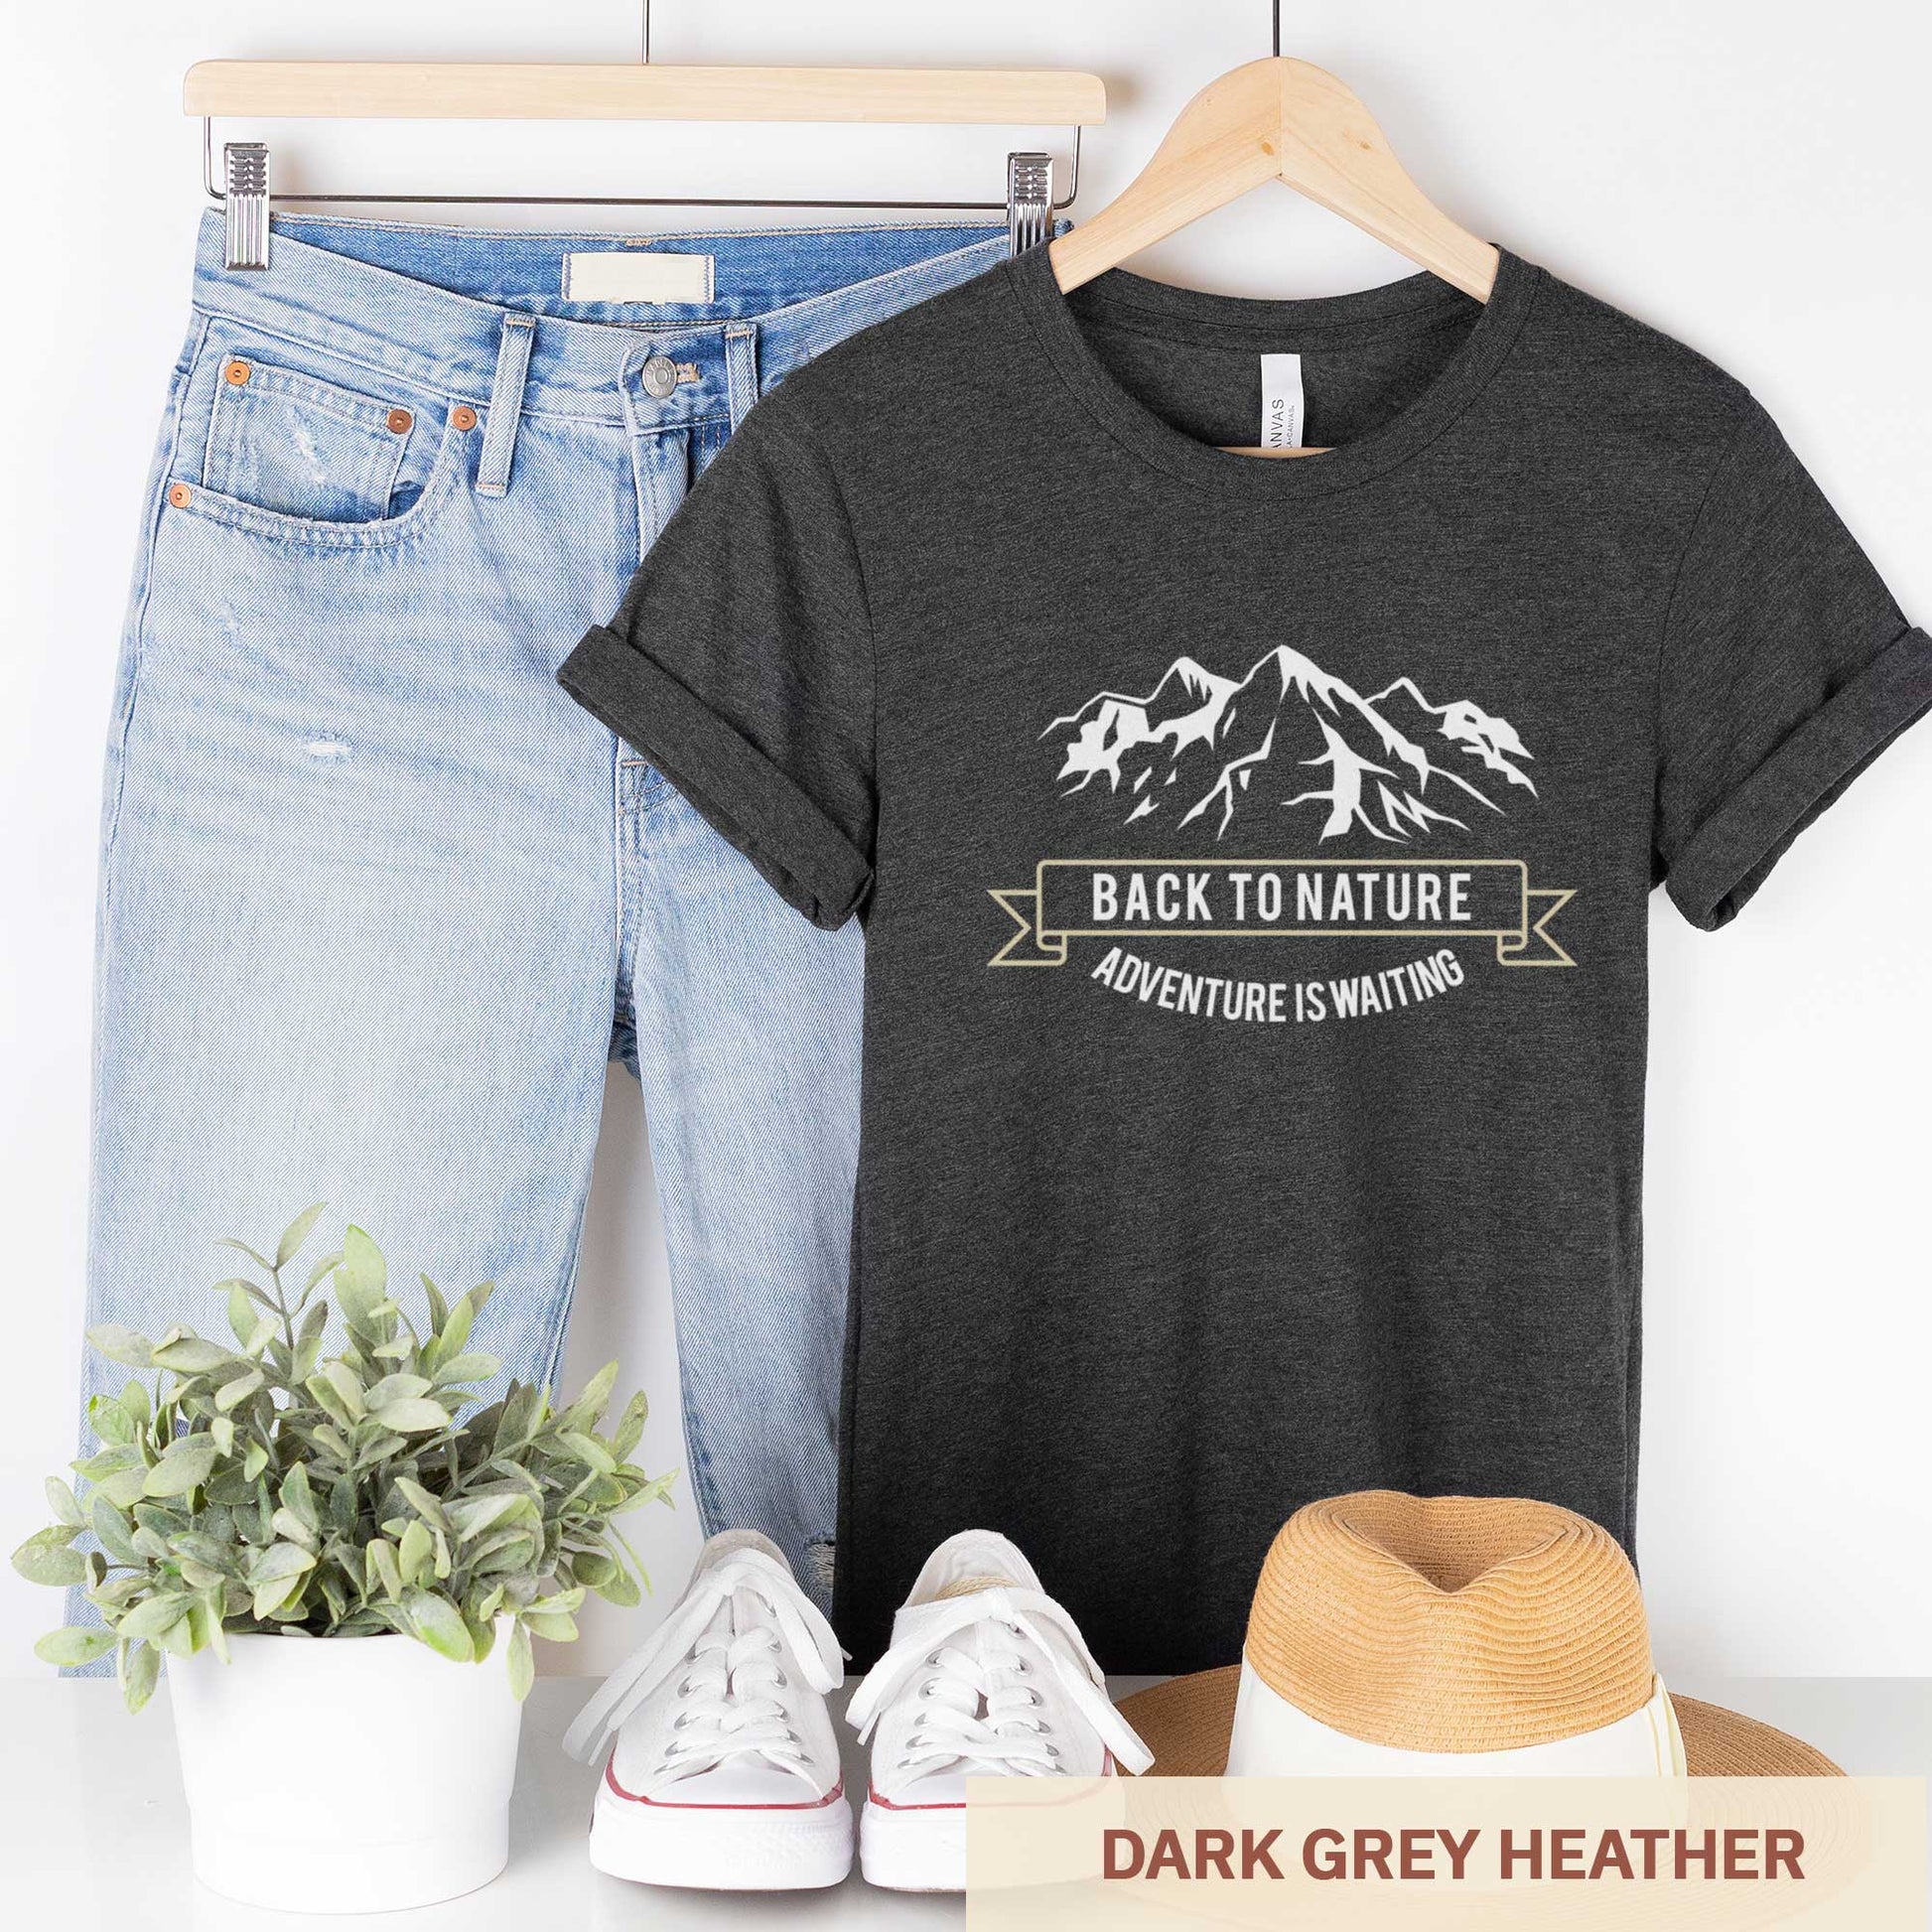 A hanging dark grey heather Bella Canvas t-shirt that says back to nature with mountains.